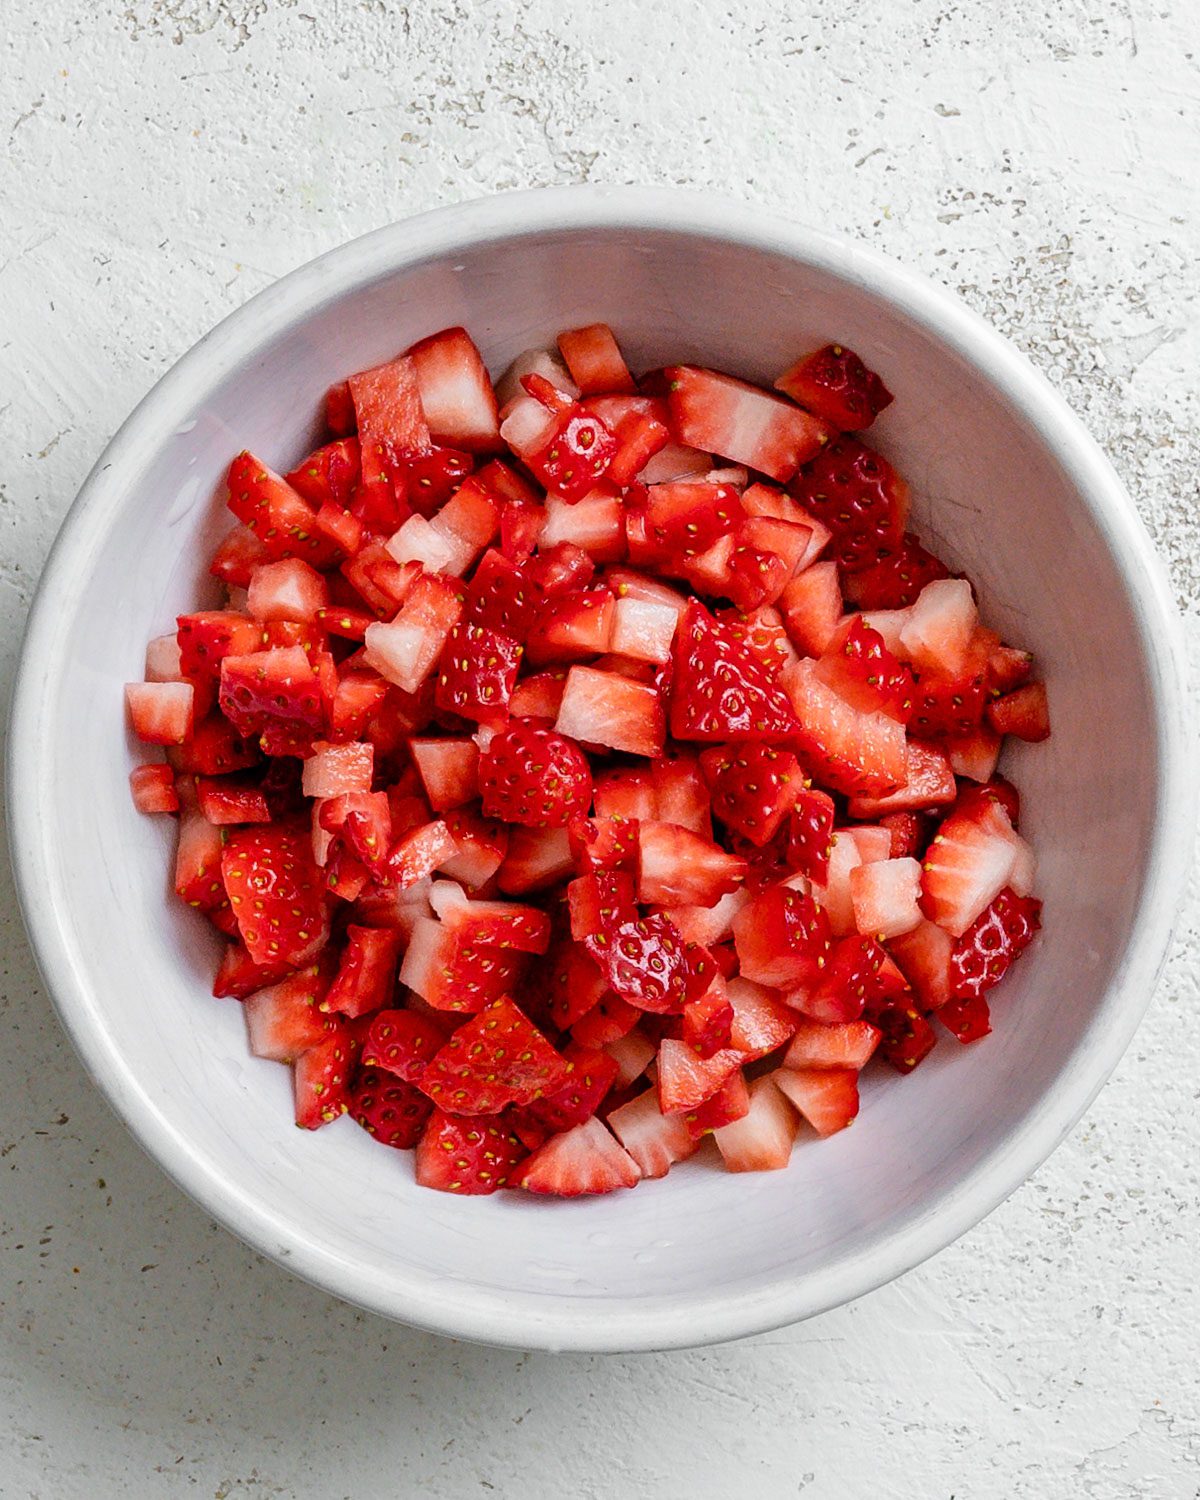 diced strawberries in a bowl against a white surface